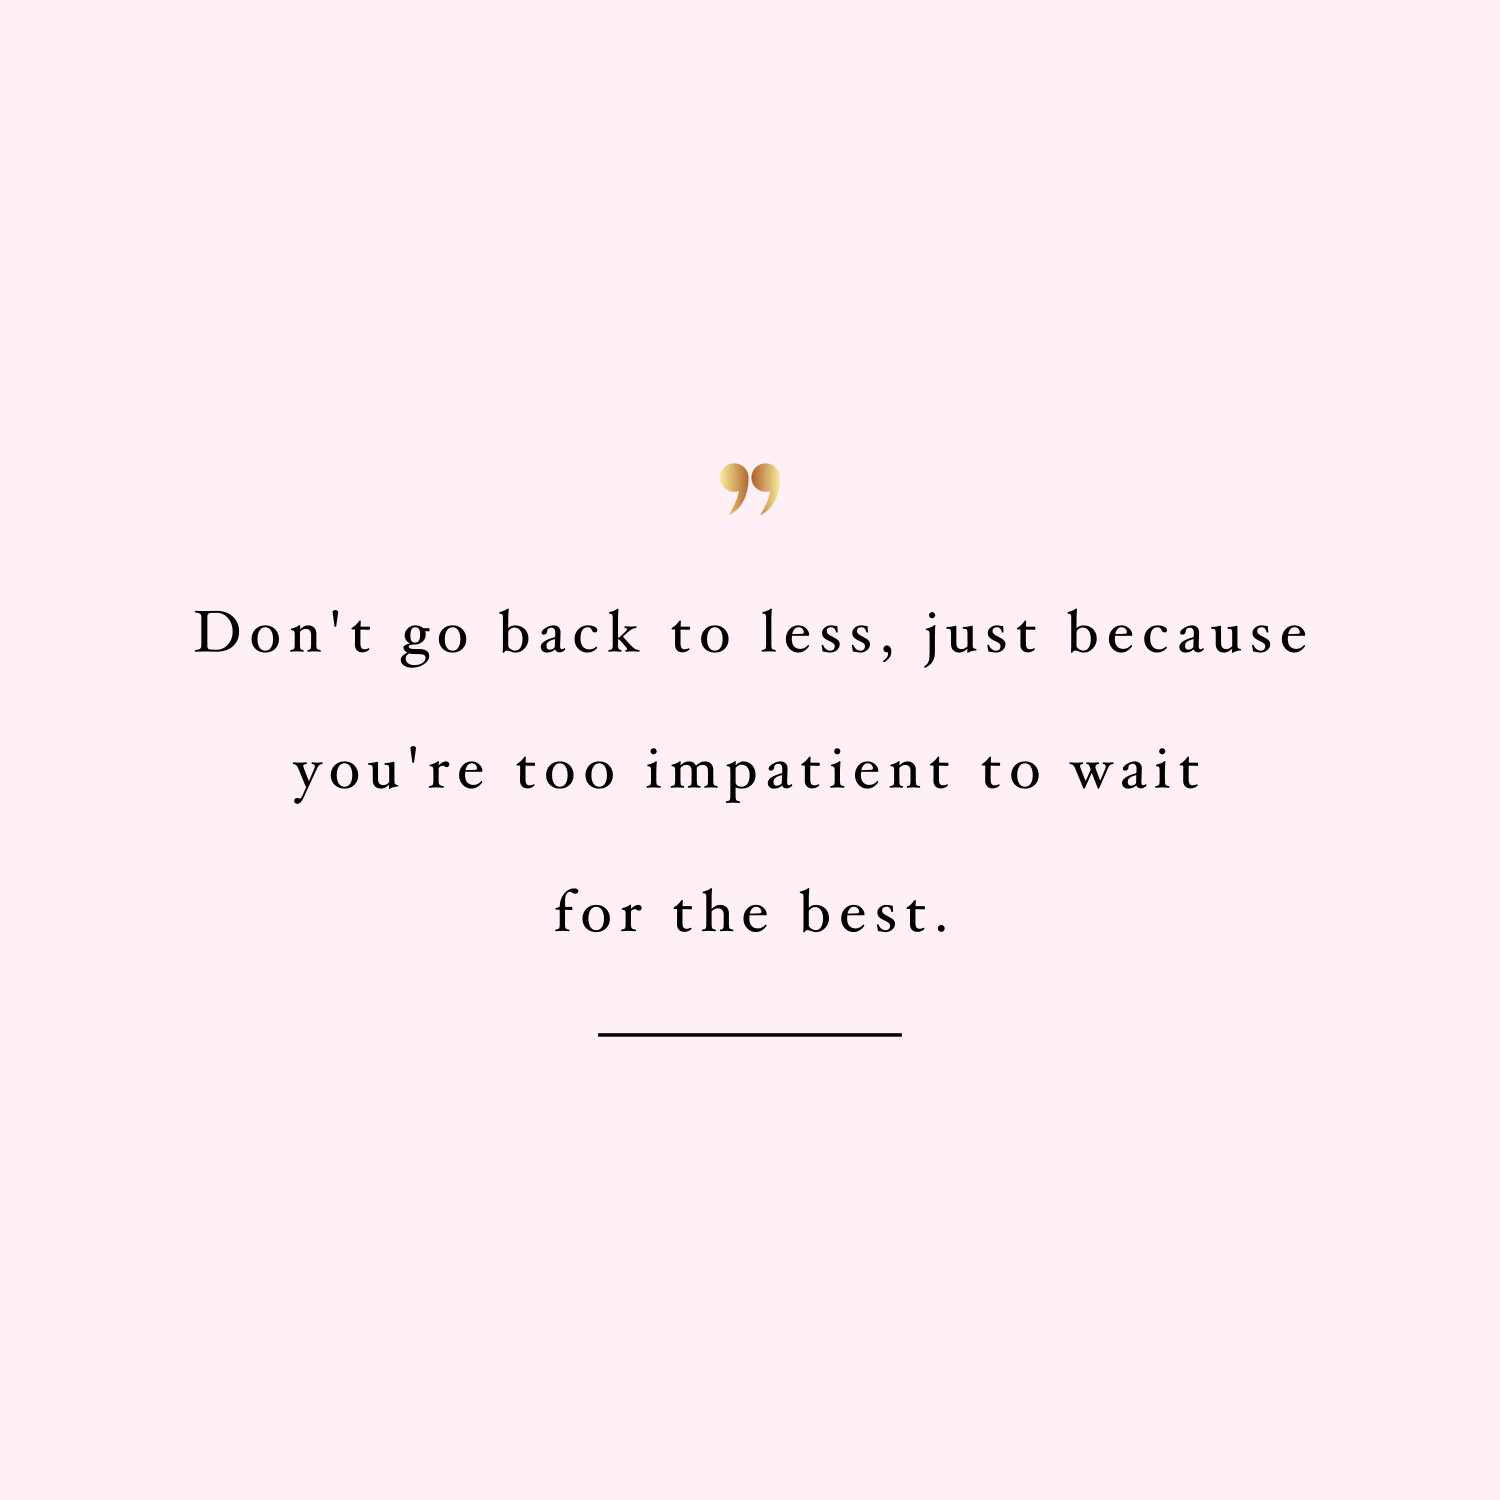 Be patient! Browse our collection of inspirational health and fitness quotes and get instant training and weight loss motivation. Transform positive thoughts into positive actions and get fit, healthy and happy! https://www.spotebi.com/workout-motivation/be-patient/